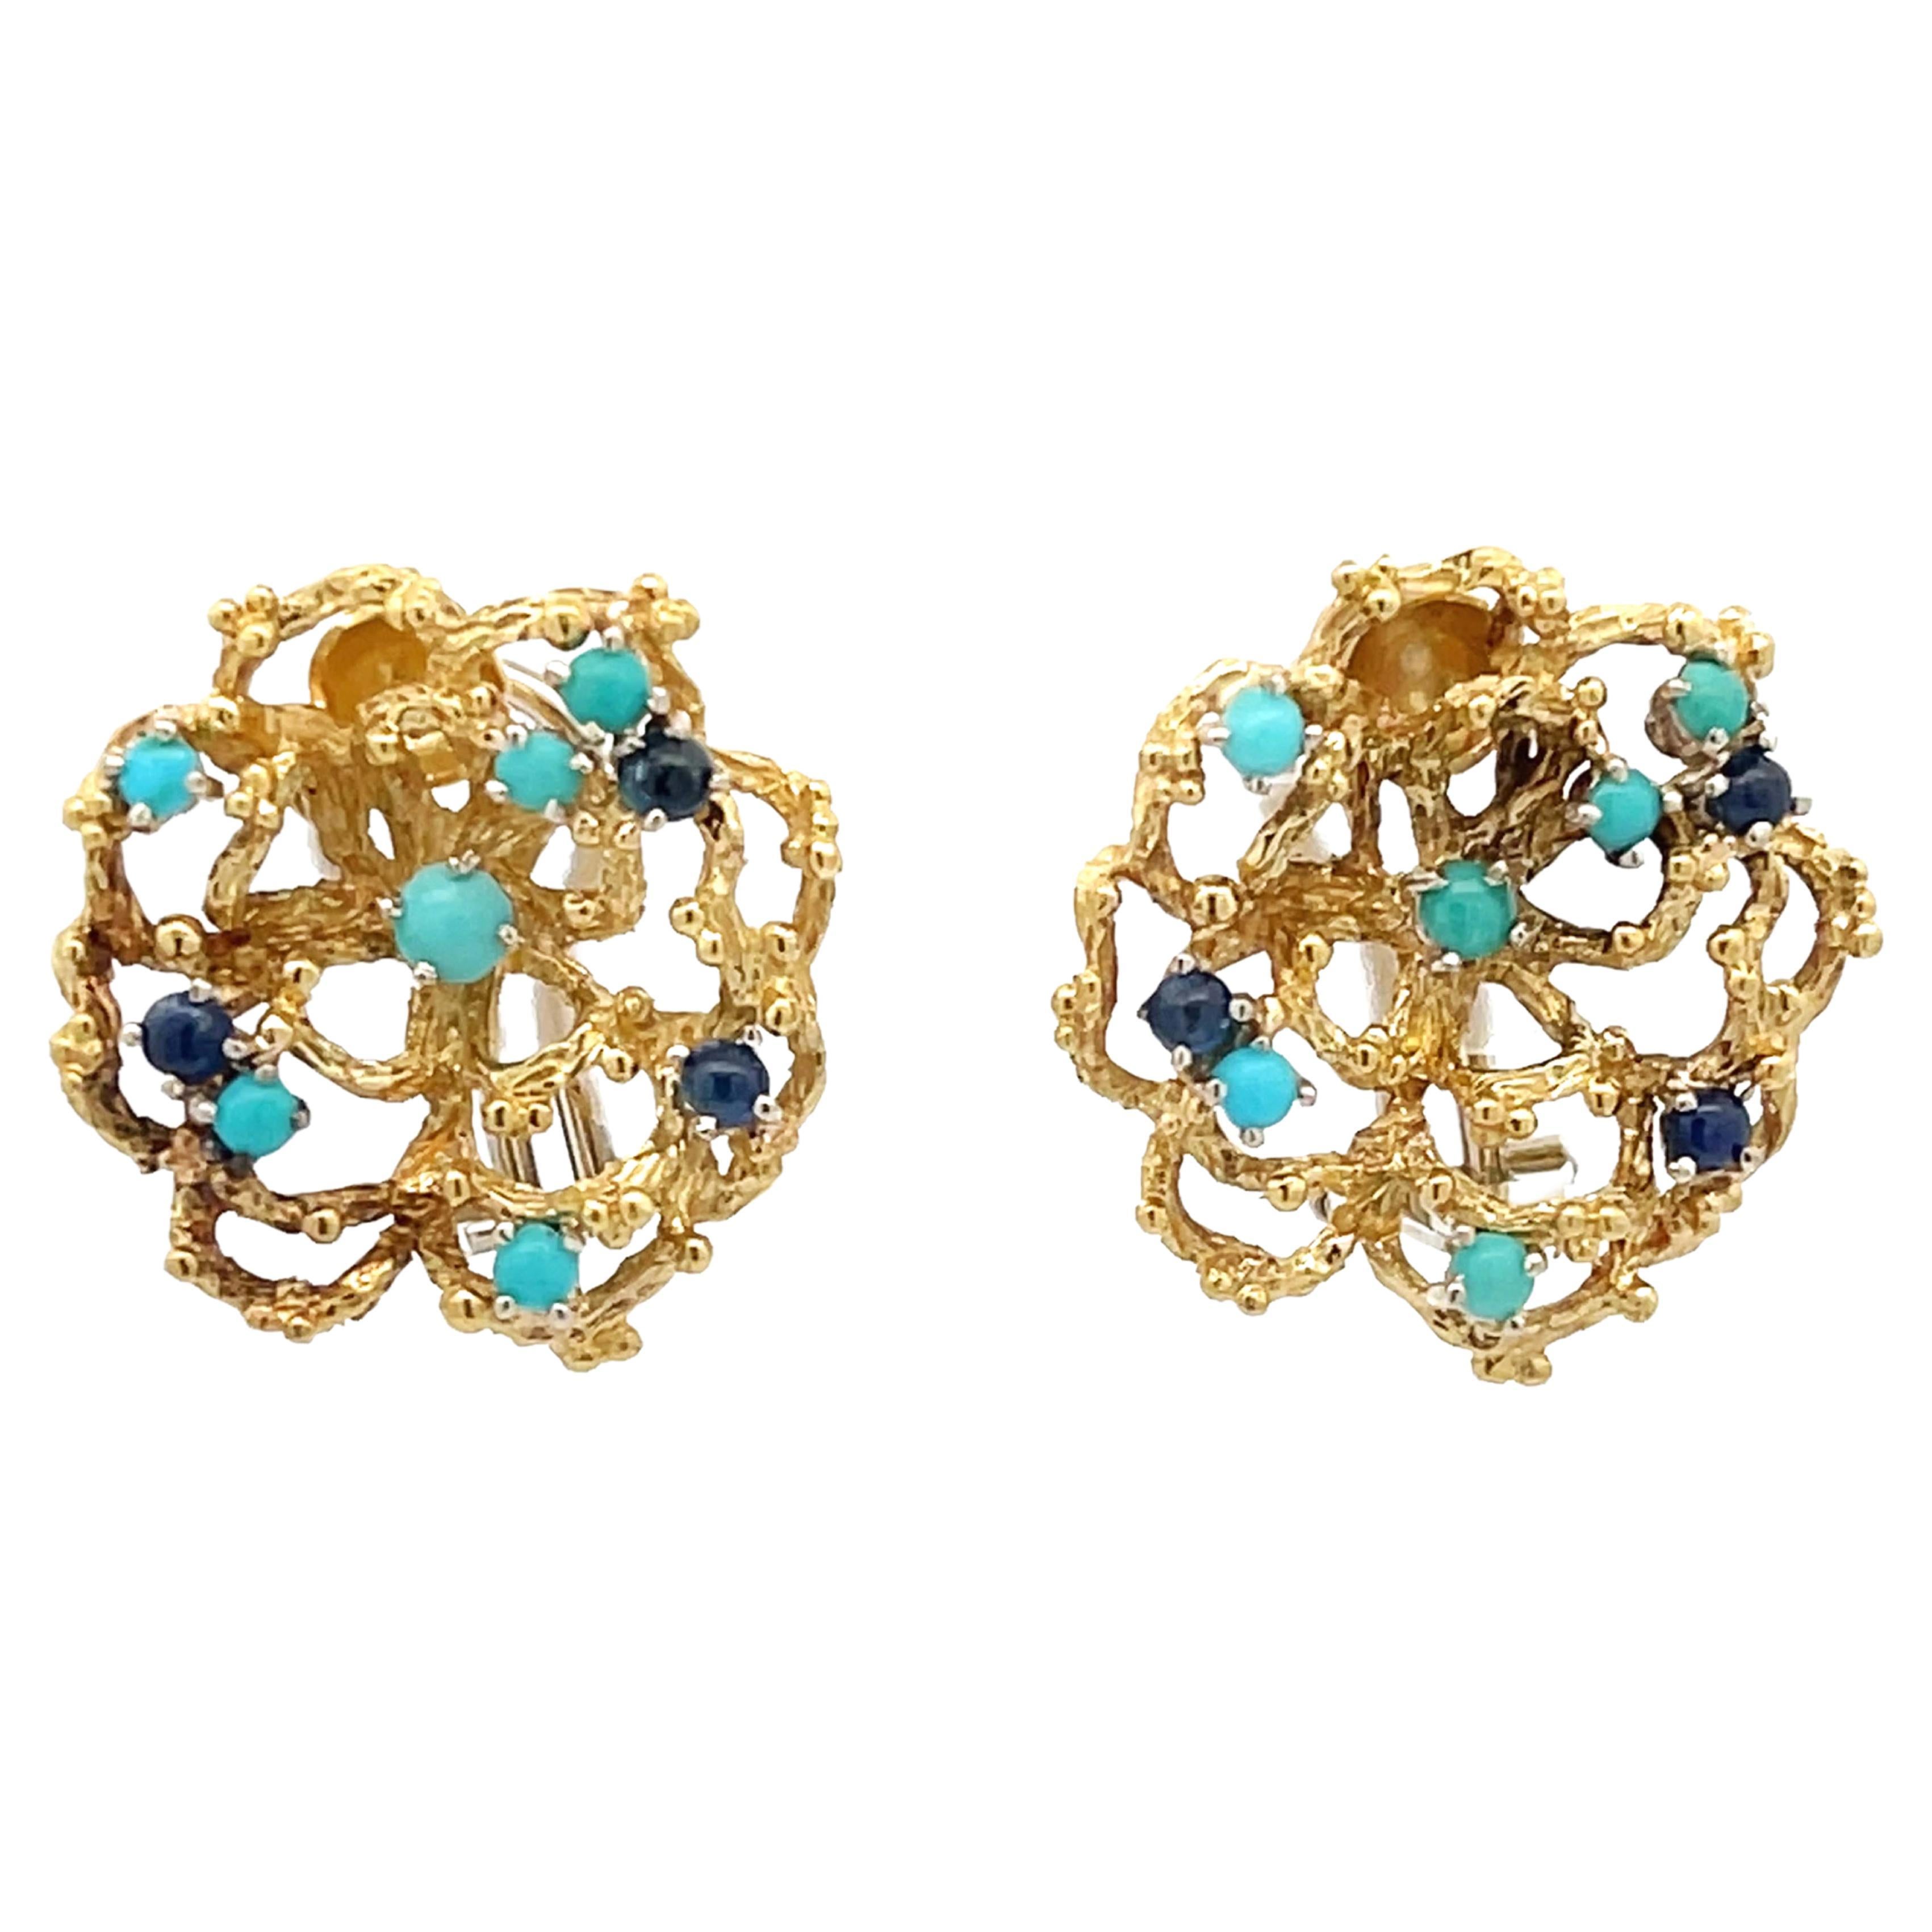 Wavy Flower Earrings with Cabochon Sapphires and Turquoises in 18k Yellow Gold